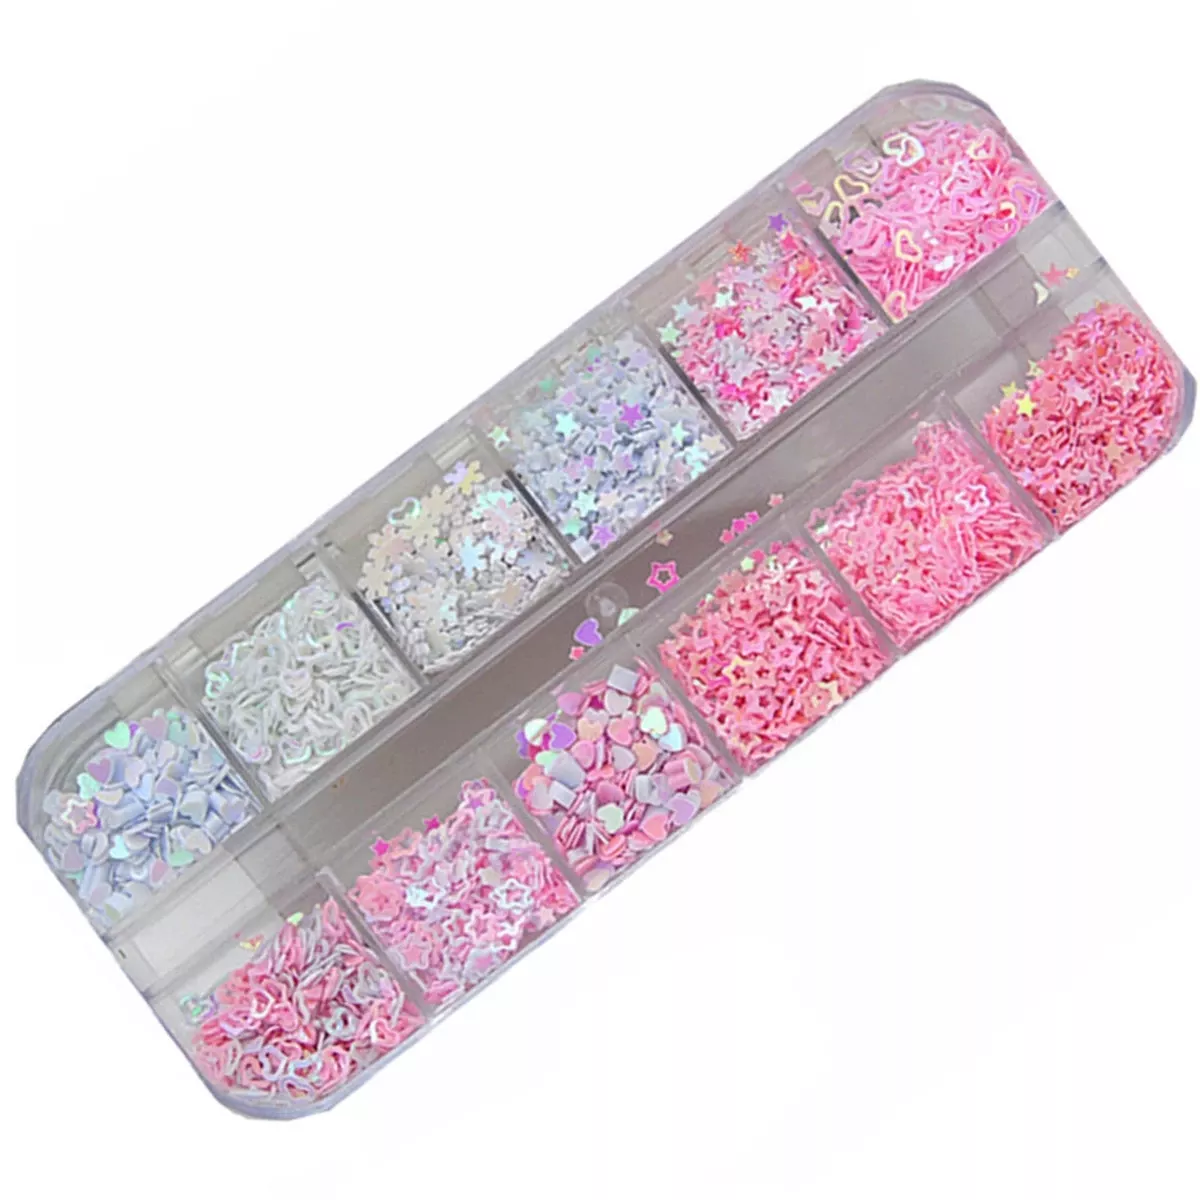 Sequins Holographic Holo Love Star Pink White Nail Body Art Glitter Box Sequin Nails Paillette Flakes Decoration Manicure Tools